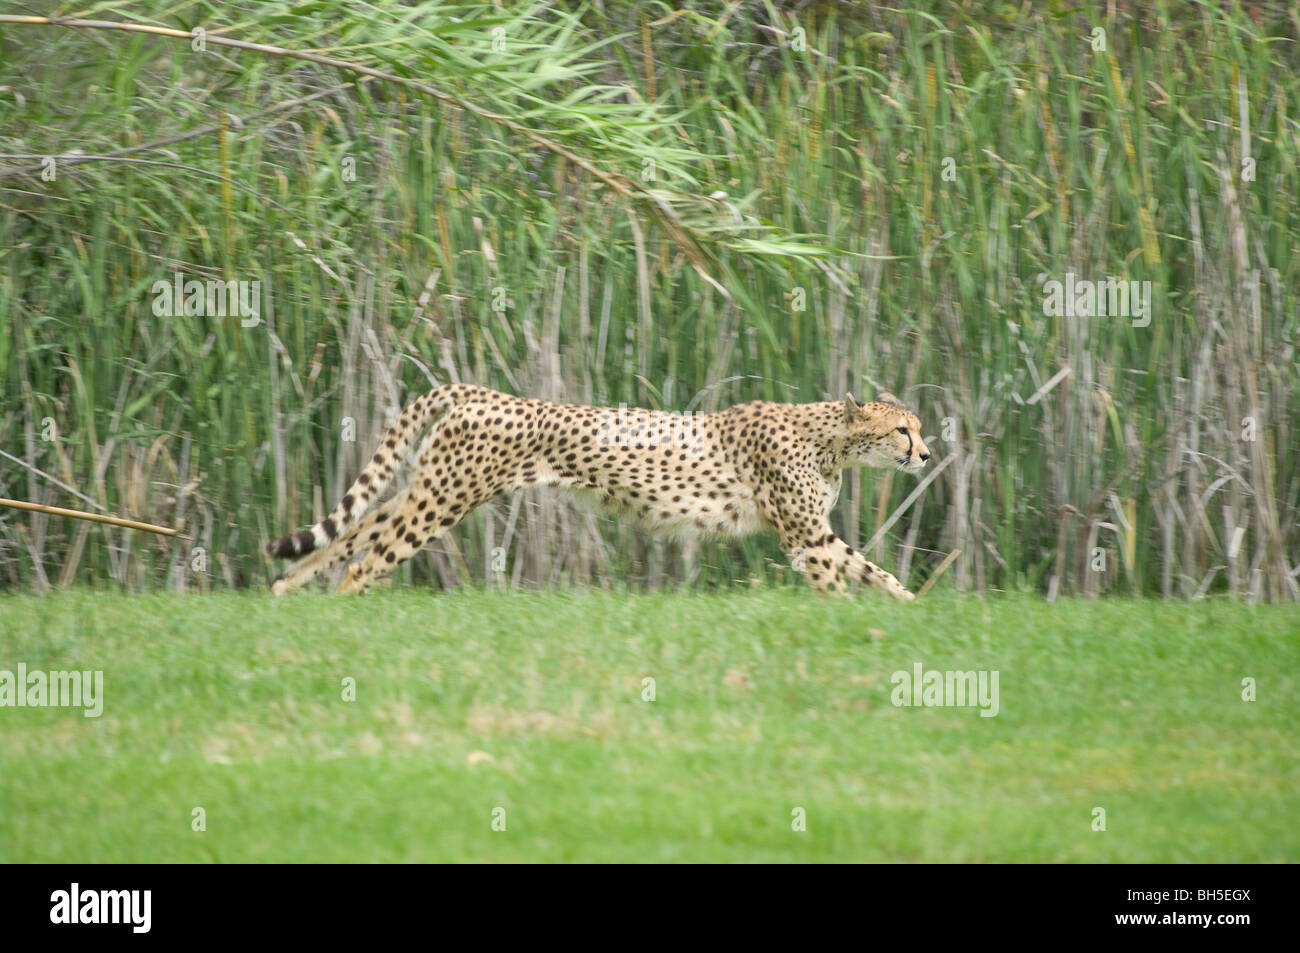 great image of a female spotted cheetah running Stock Photo